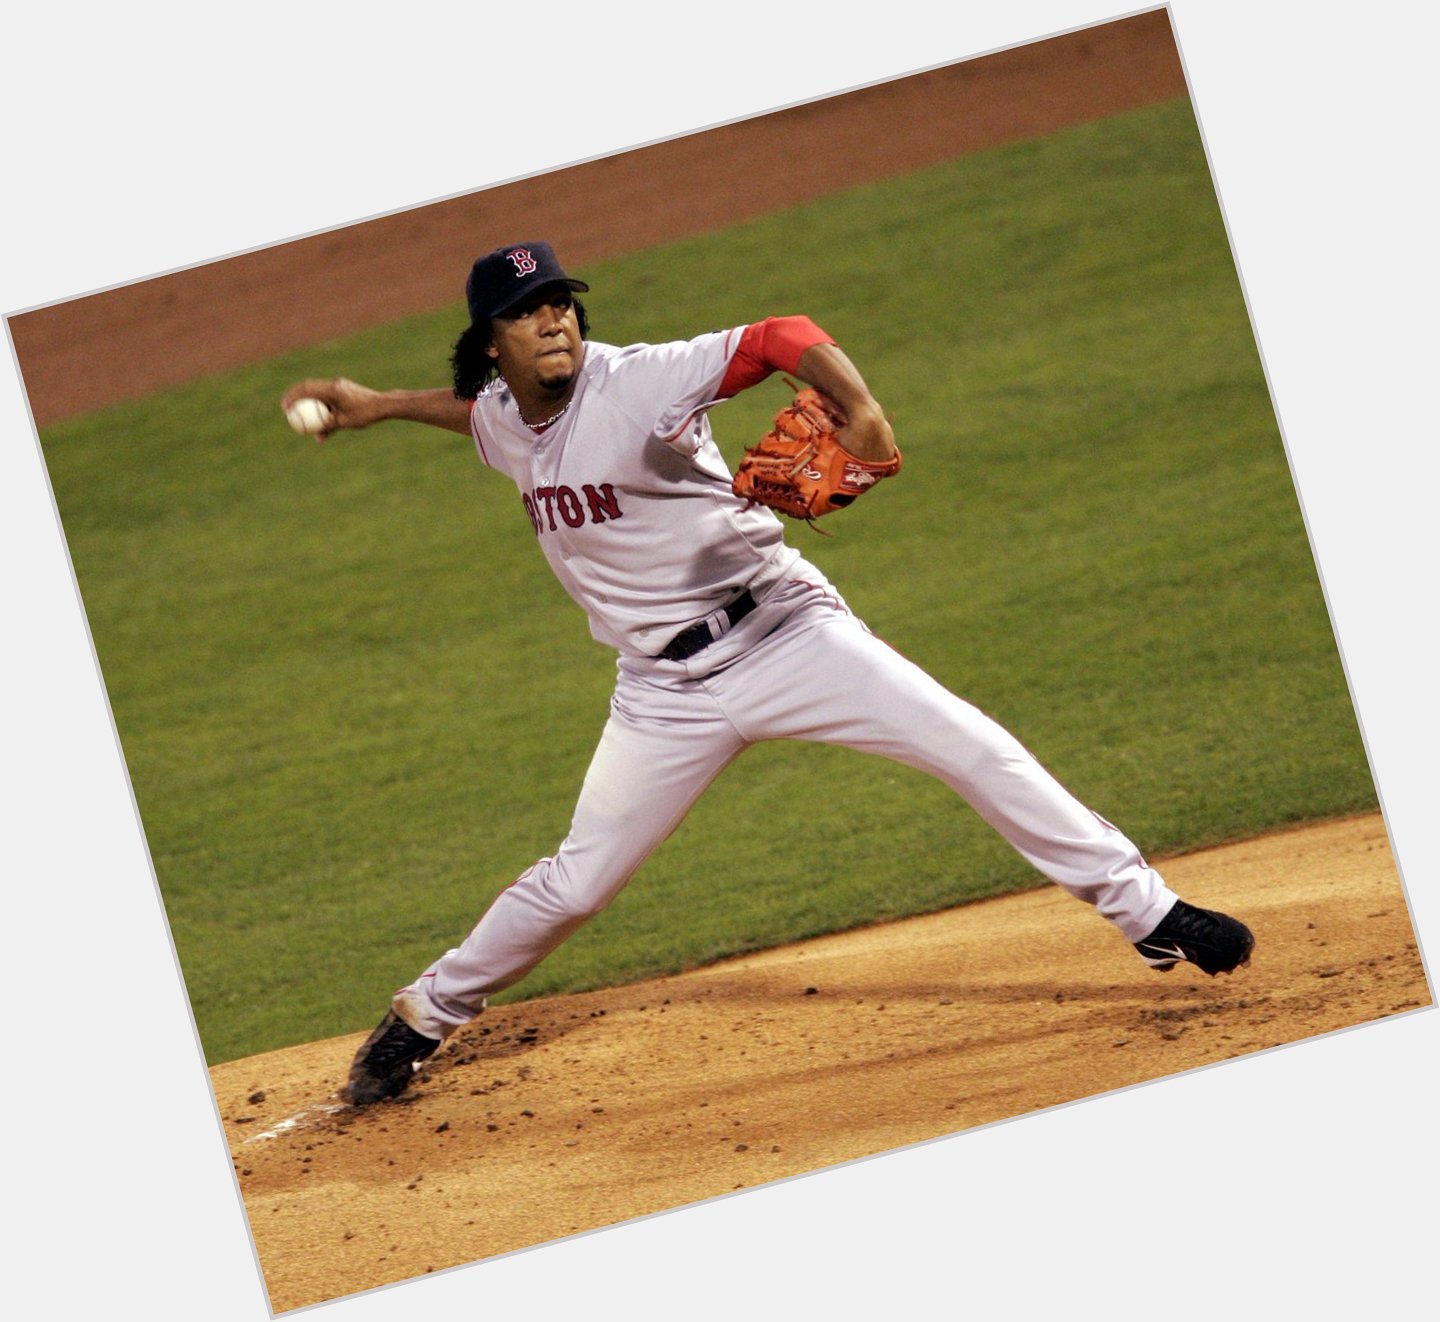 Do you remember these Pedro Martinez moments? Happy 46th birthday to the former Red Sox ace! 